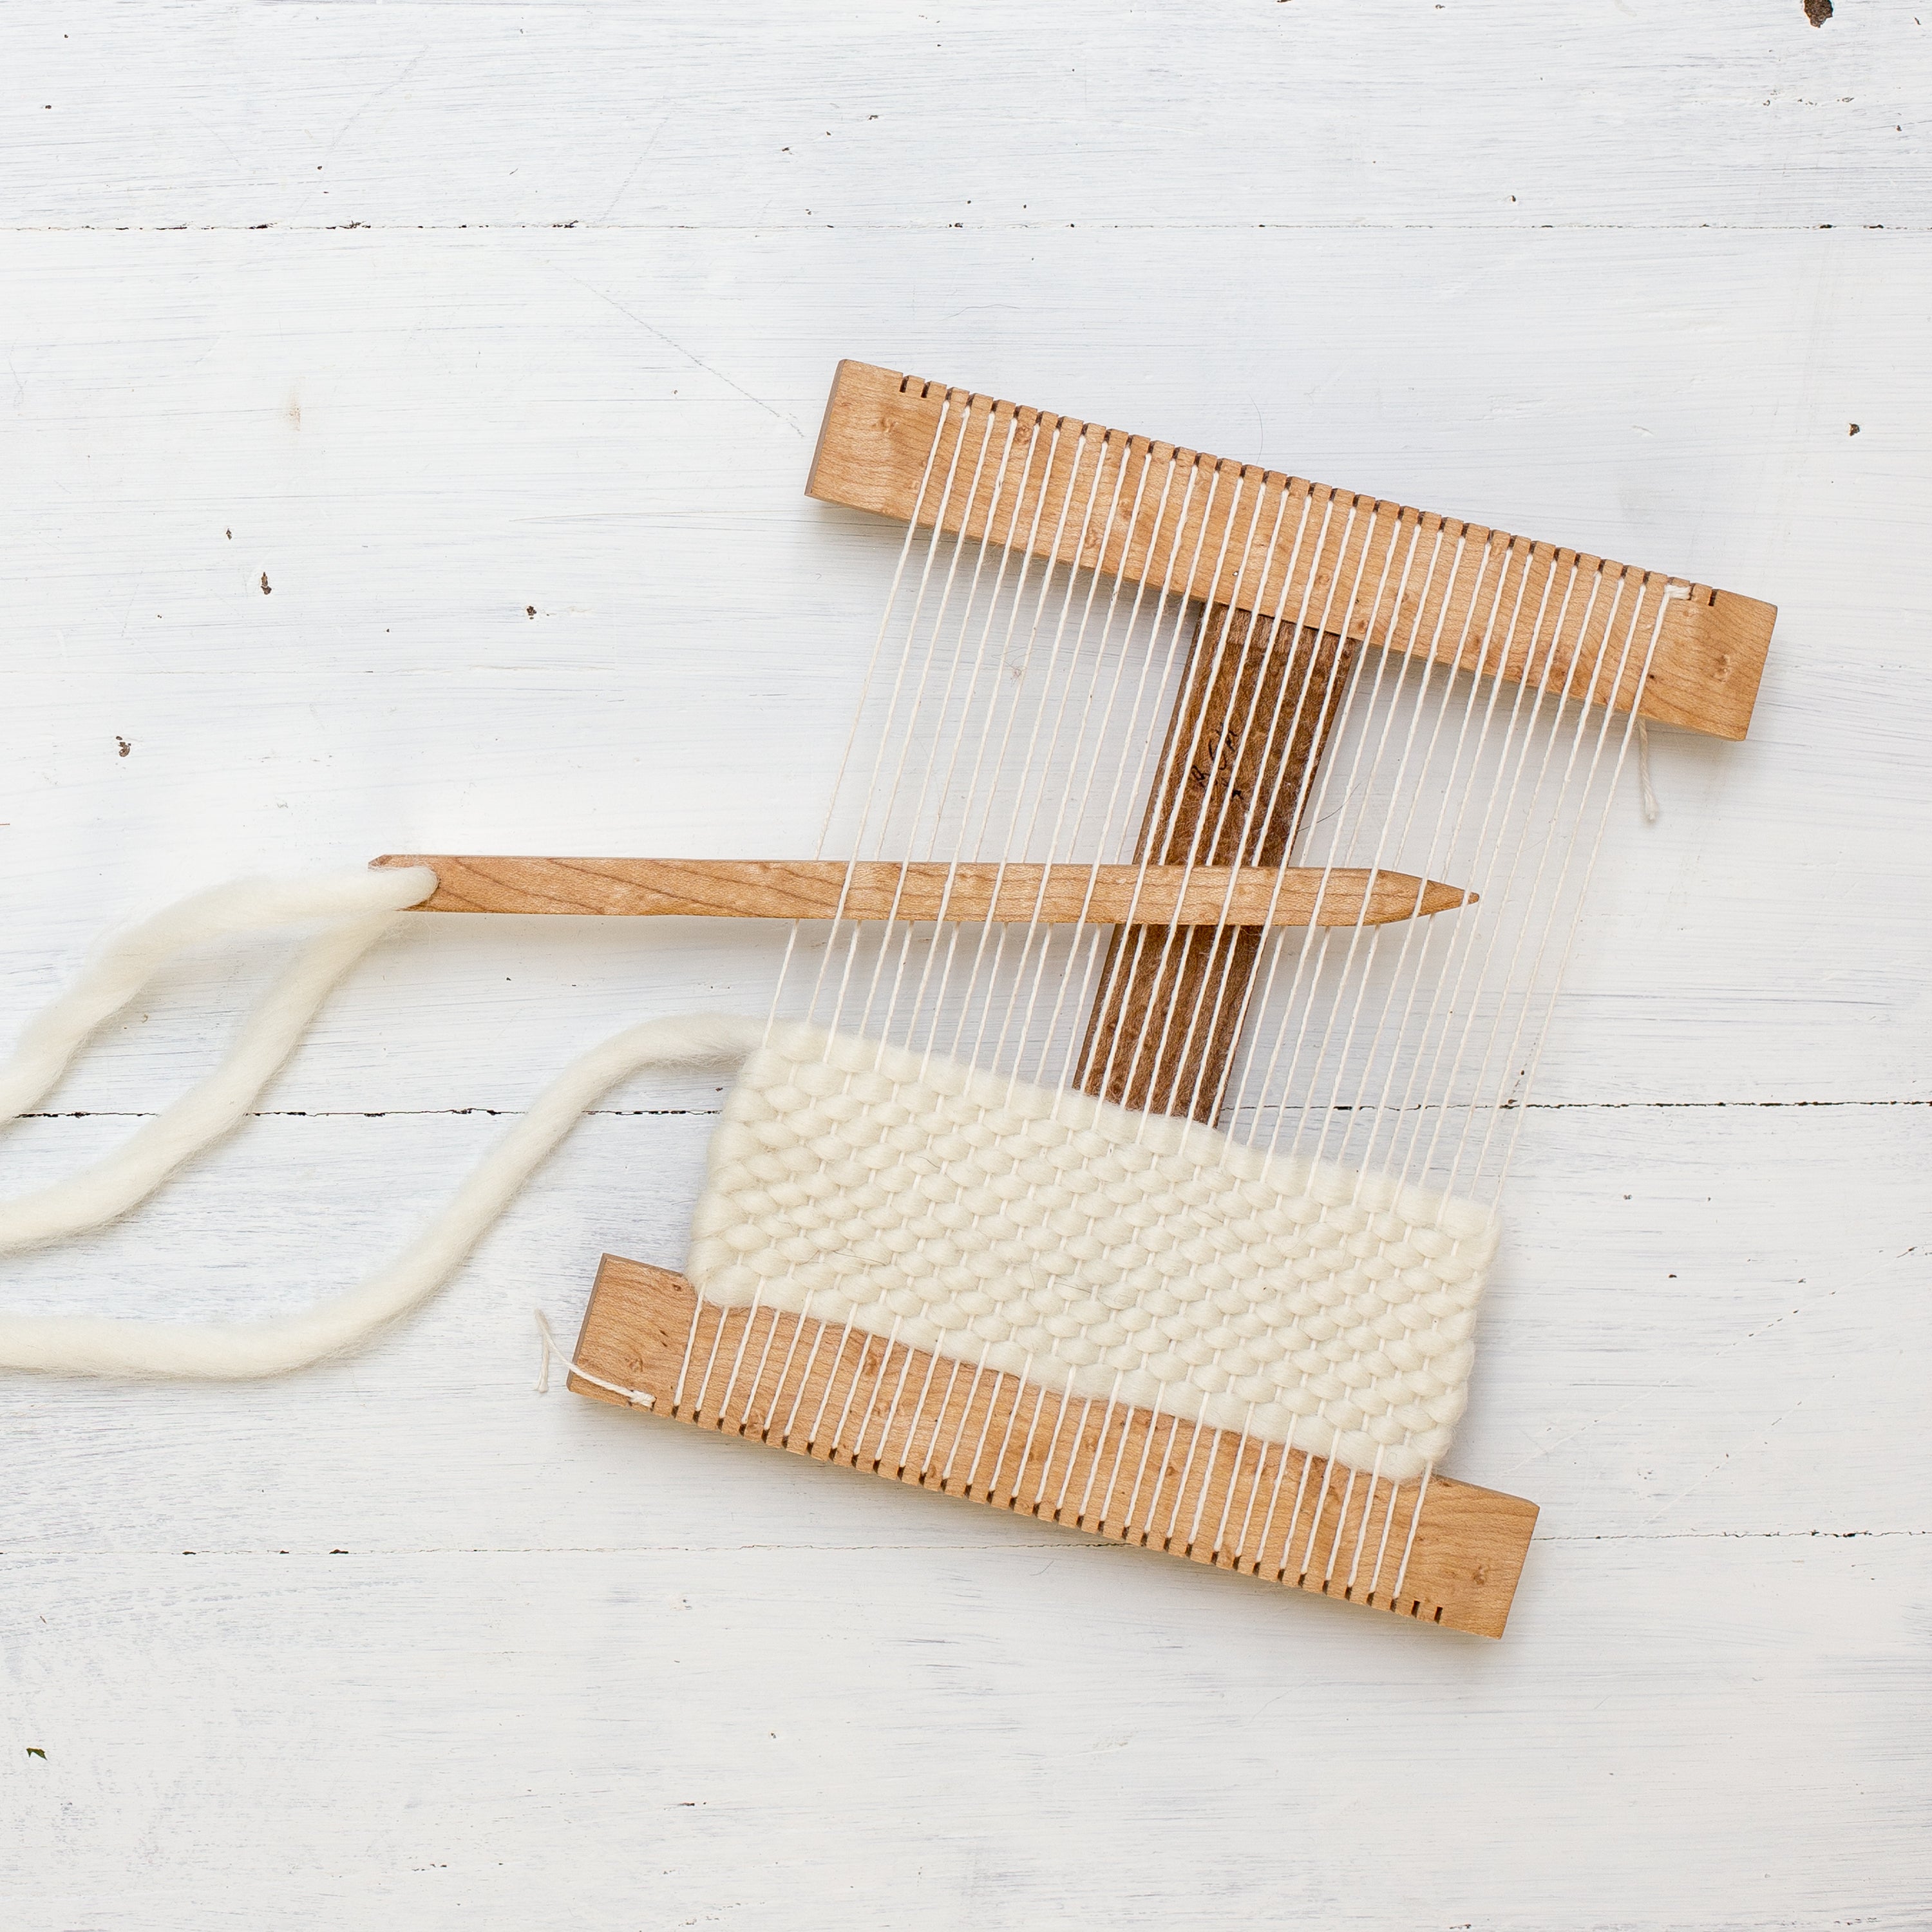 Weaving Loom Kit for a Useful DIY Project: Review of the Flax and Twine -  The Craft Blogger